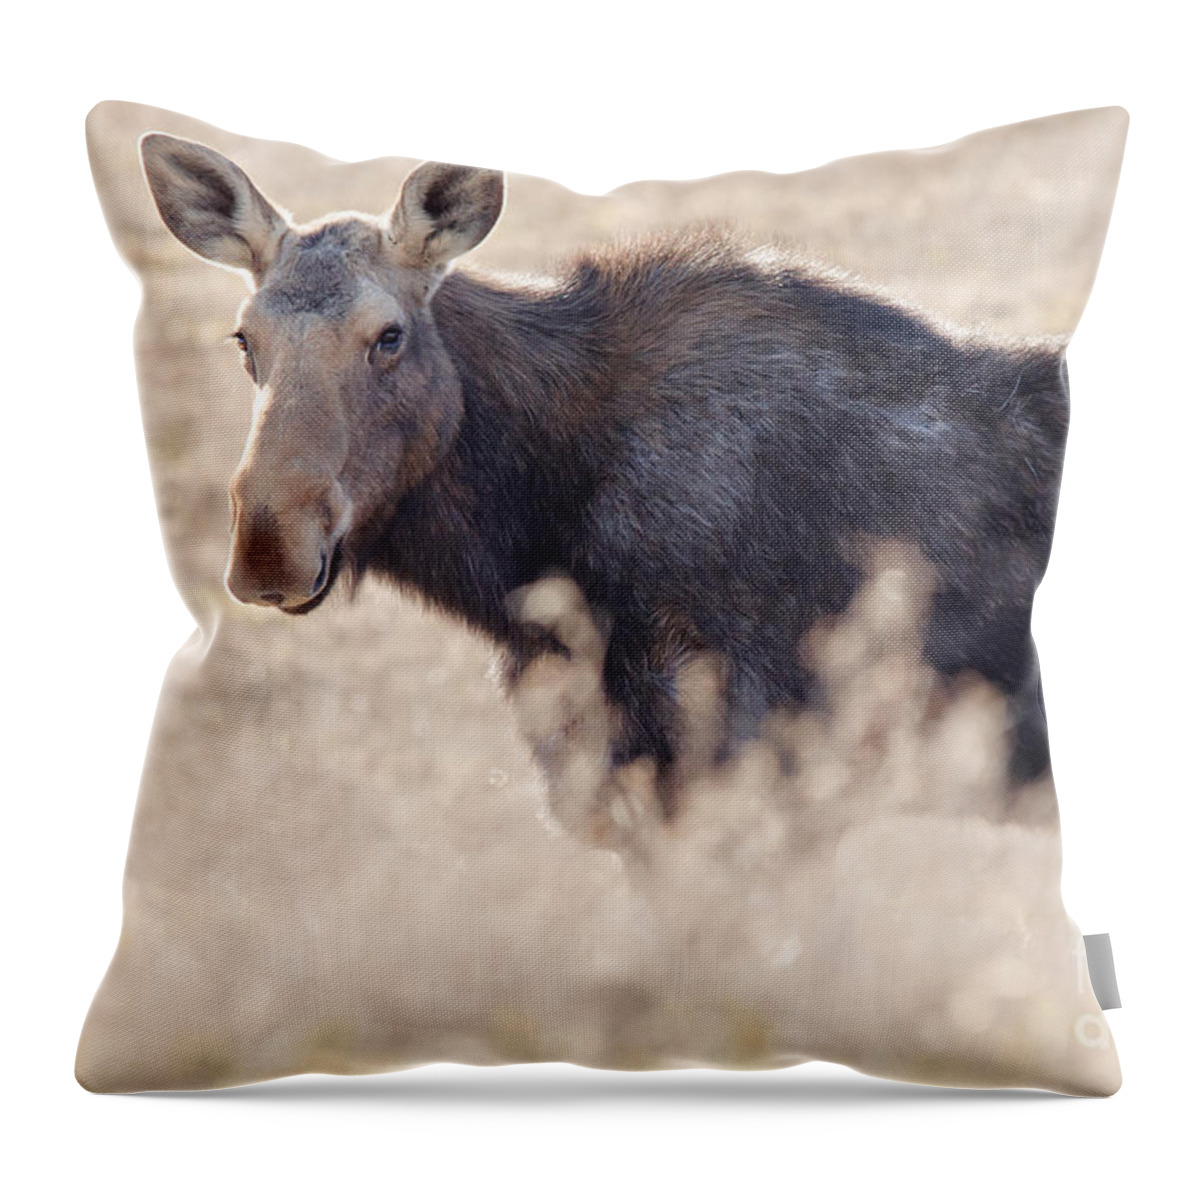  Throw Pillow featuring the photograph Spring Moose by Cheryl Baxter